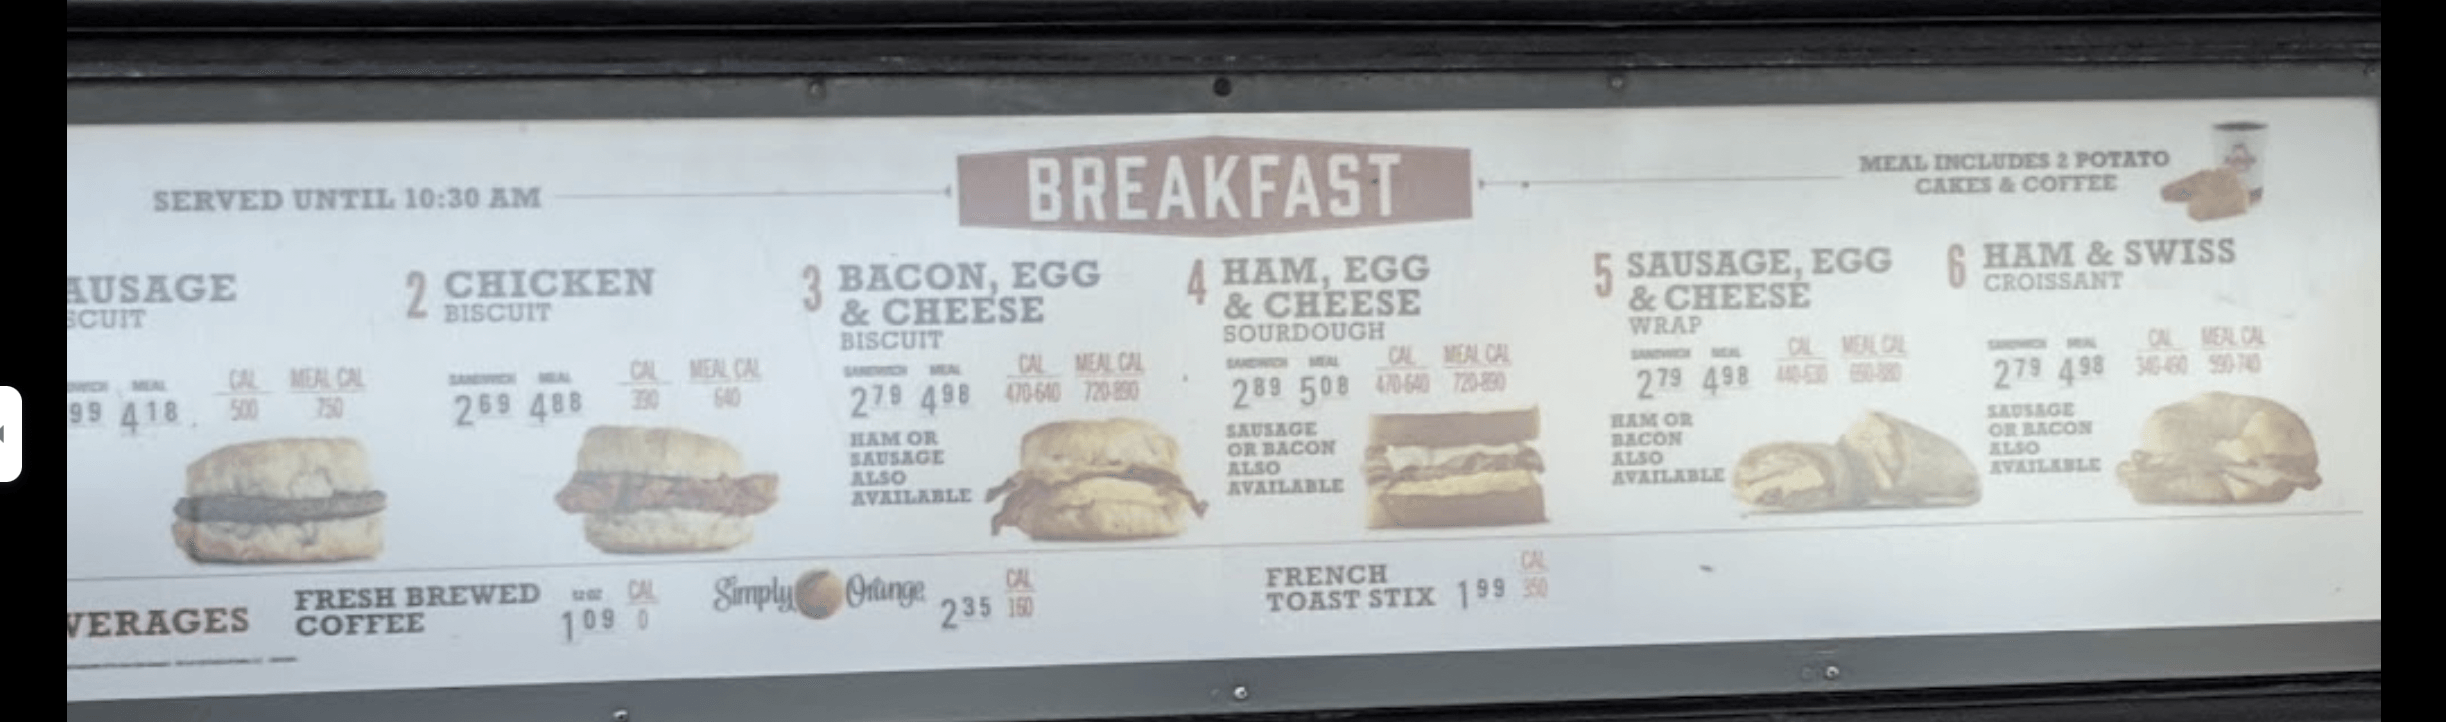 A Arby's breakfast menu is displayed on a street sign.